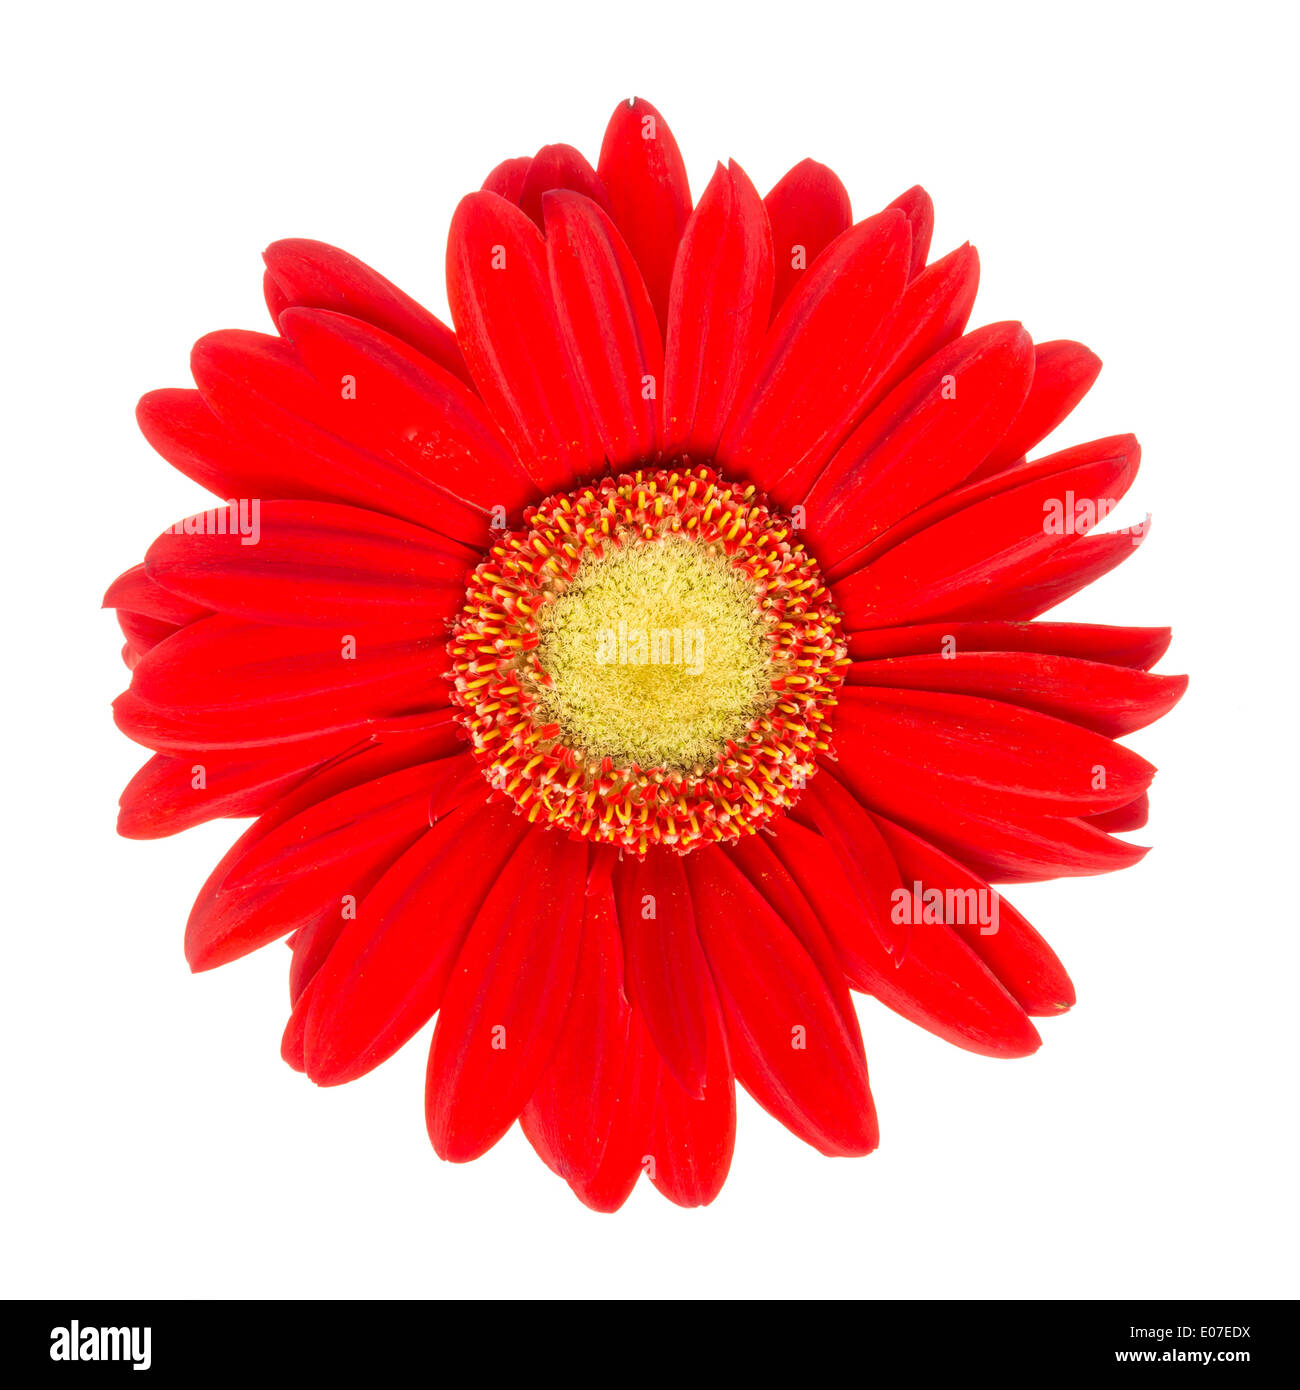 Closeup view of a red daisy isolated on white Stock Photo